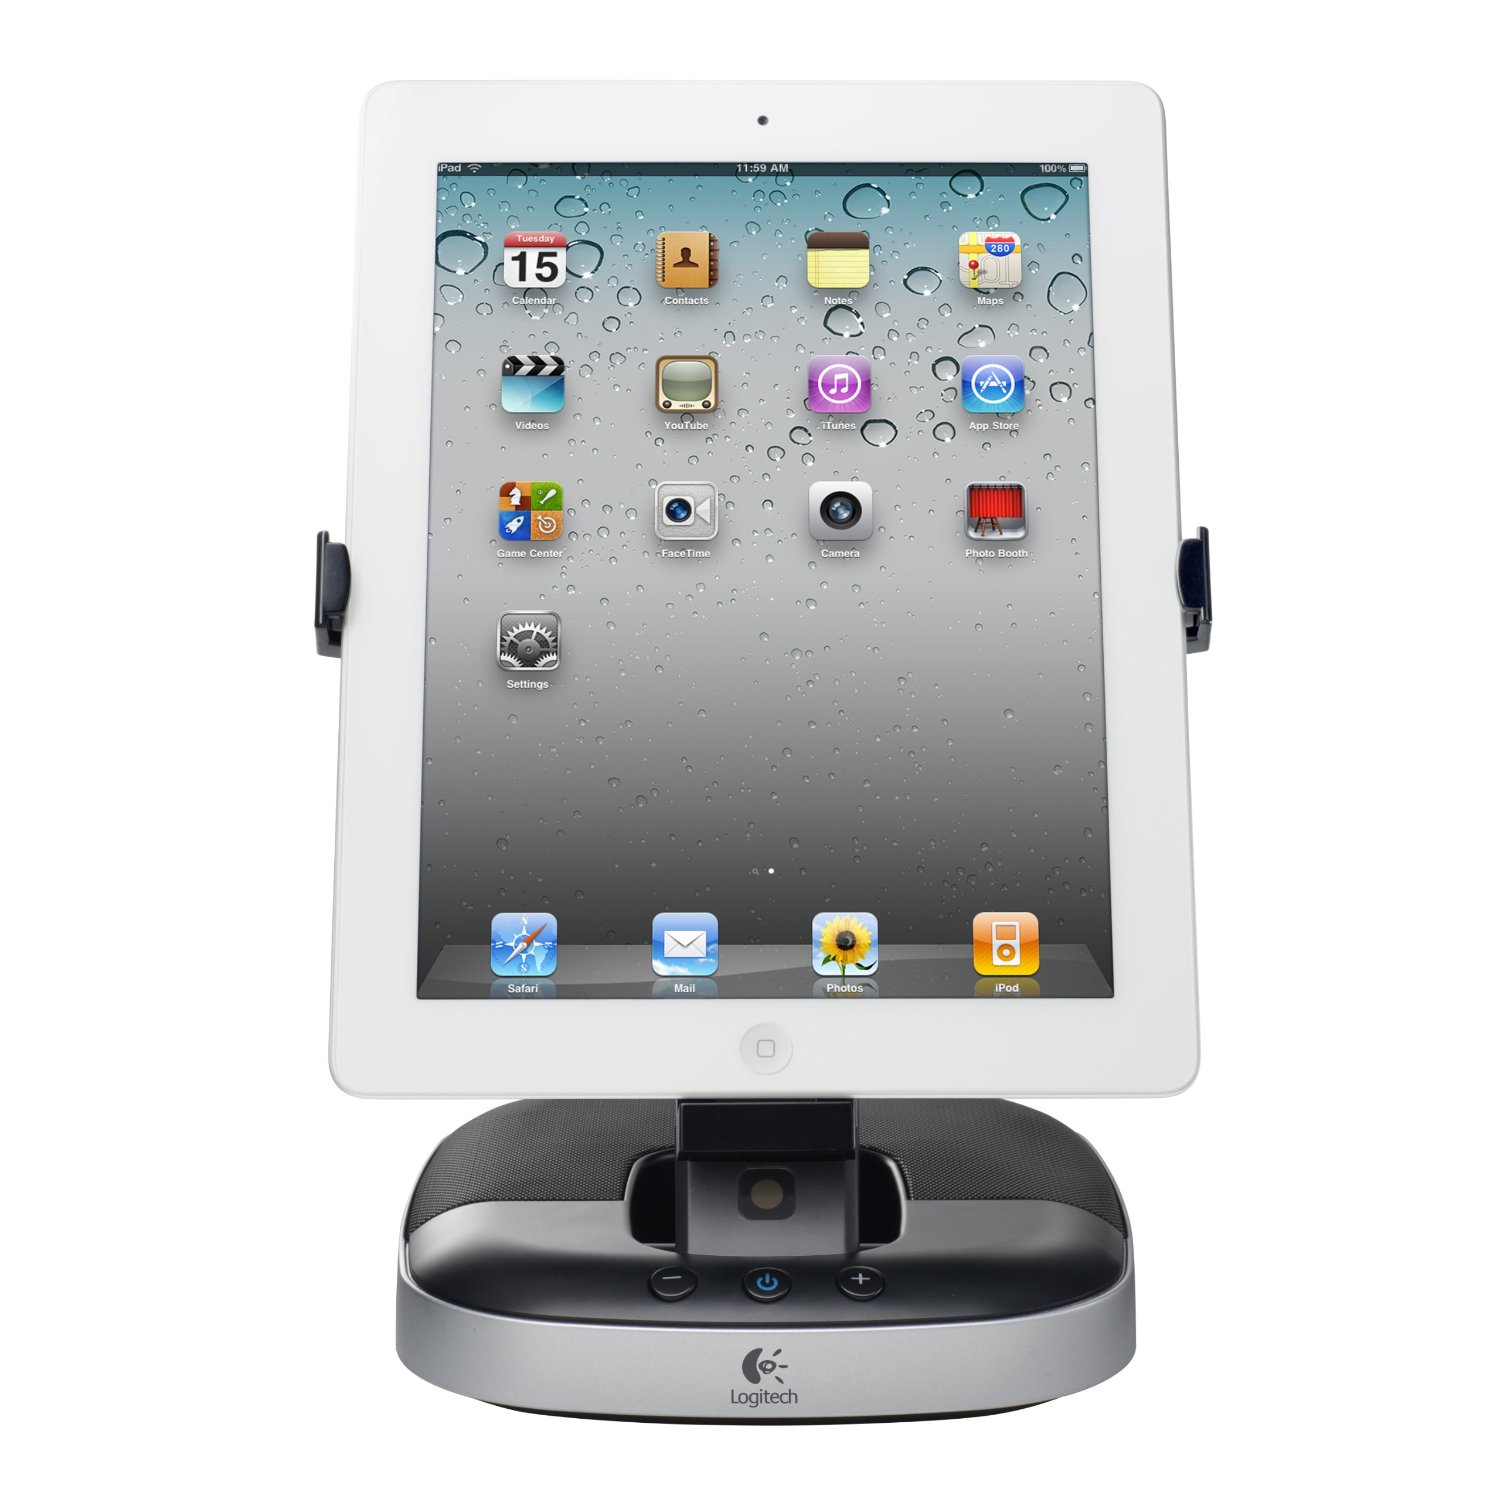 http://thetechjournal.com/wp-content/uploads/images/1203/1331142371-logitech-speaker-stand-and-charging-station-for-ipad--6.jpg